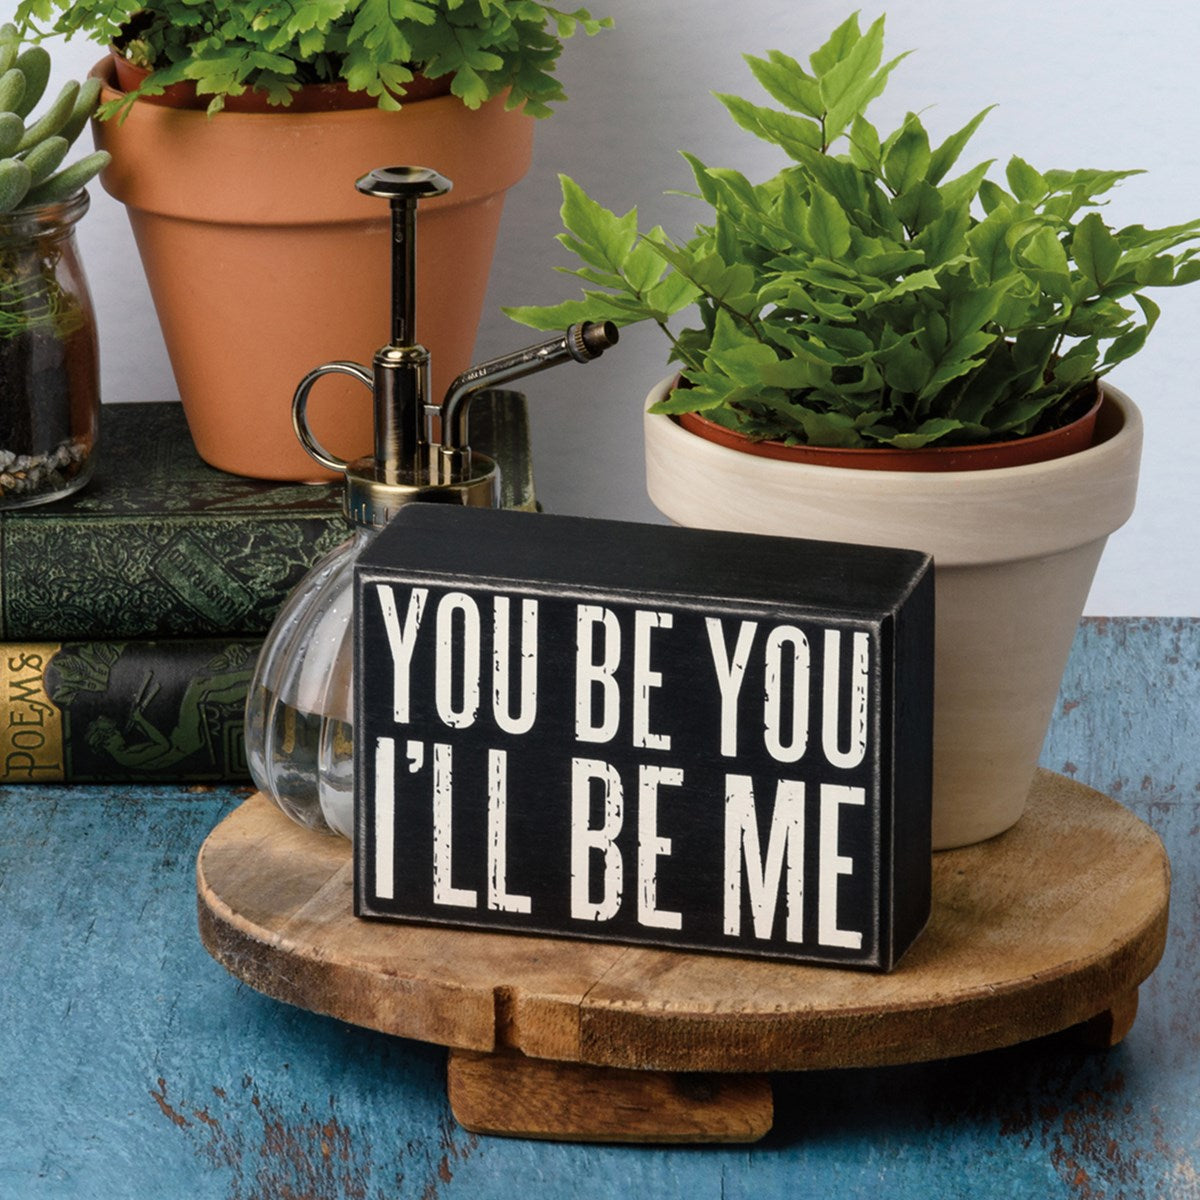 Box Sign - "You Be You, I'll Be Me"